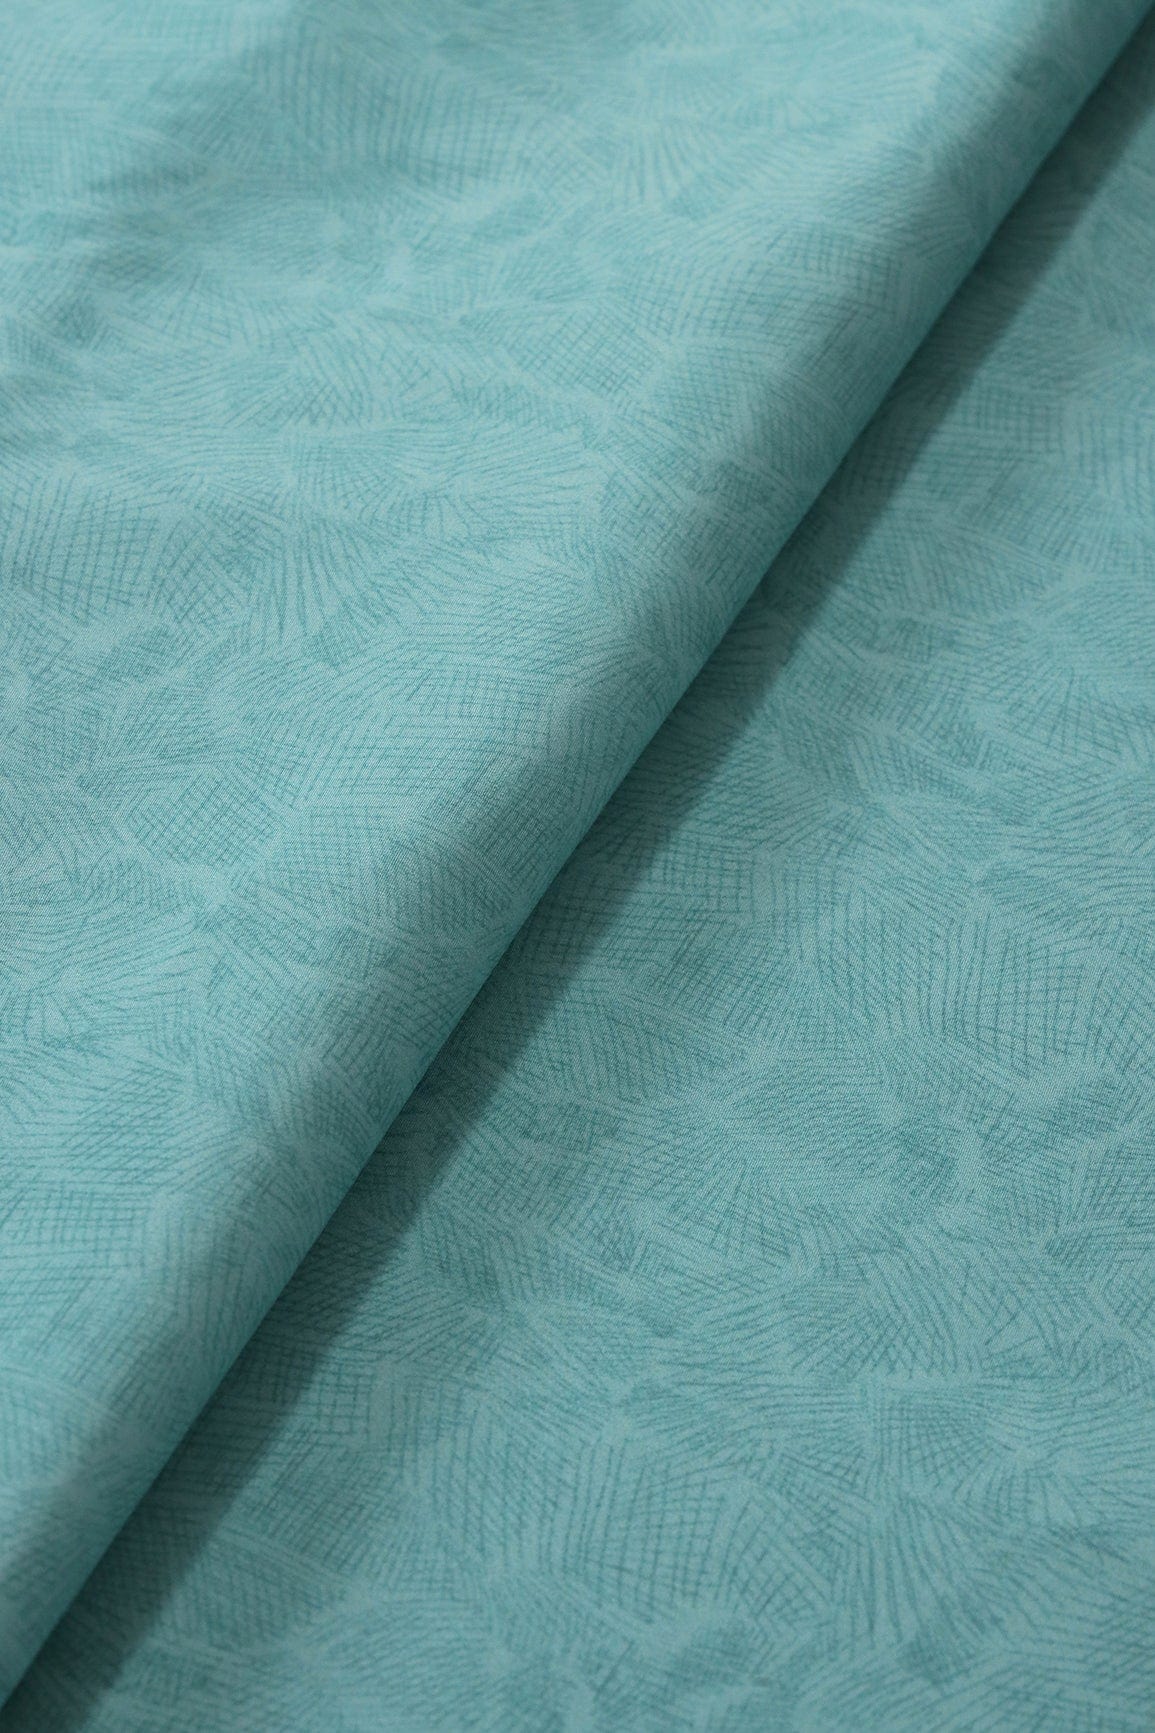 doeraa Prints Pastel Teal Abstract Pattern Digital Print On French Crepe Fabric